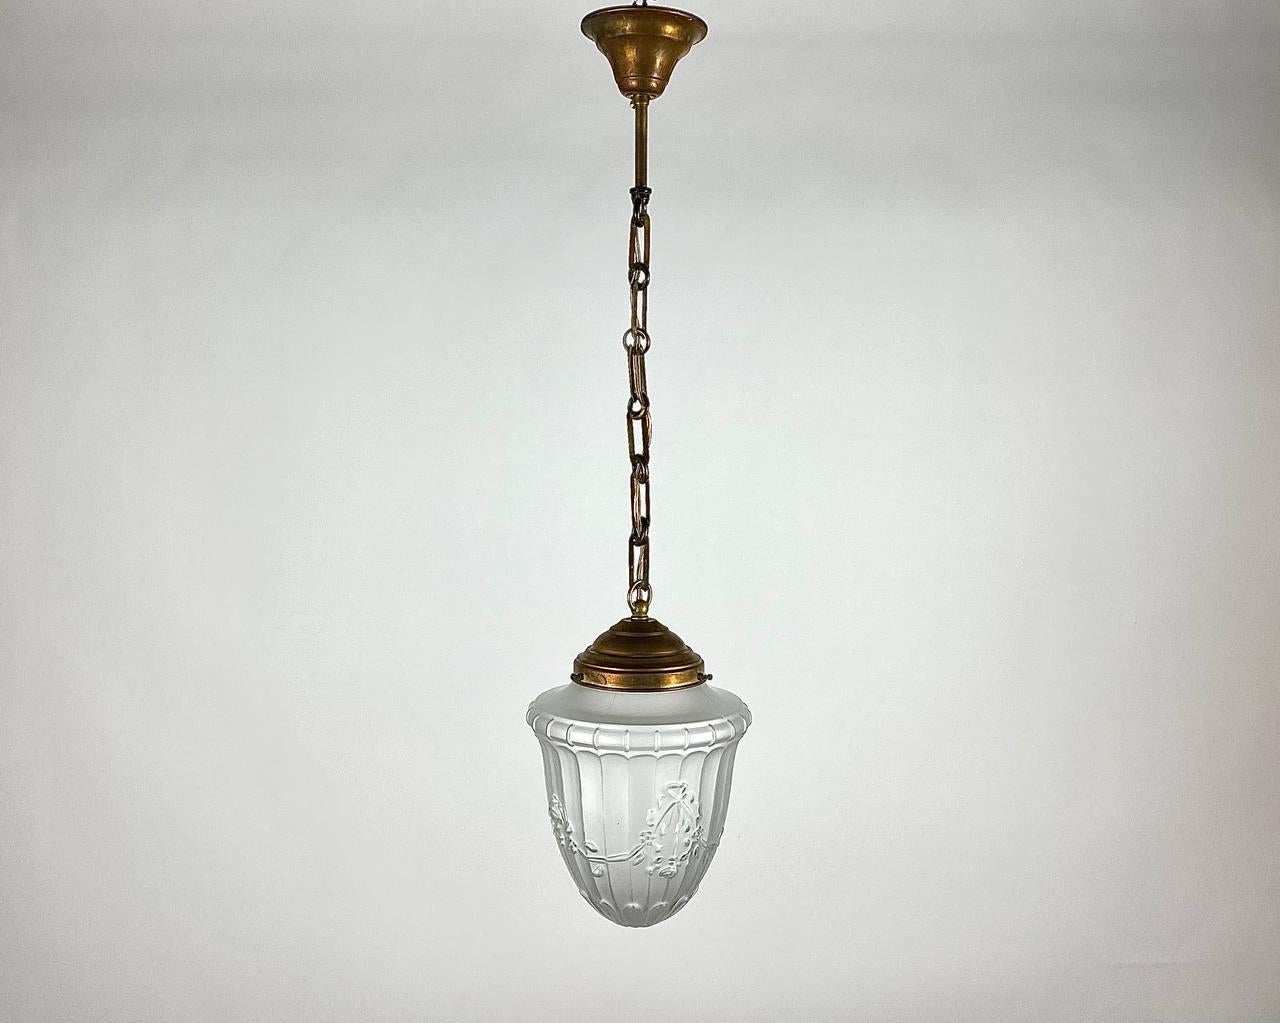 Frosted glass pendant light in brass fittings. The frosted glass give a lovely, soft glow whilst the ribbed, floral design adds interest. 

Belgium, circa 1950s.

Lighting is an integral part of any decor. It delivers the right ambiance and makes